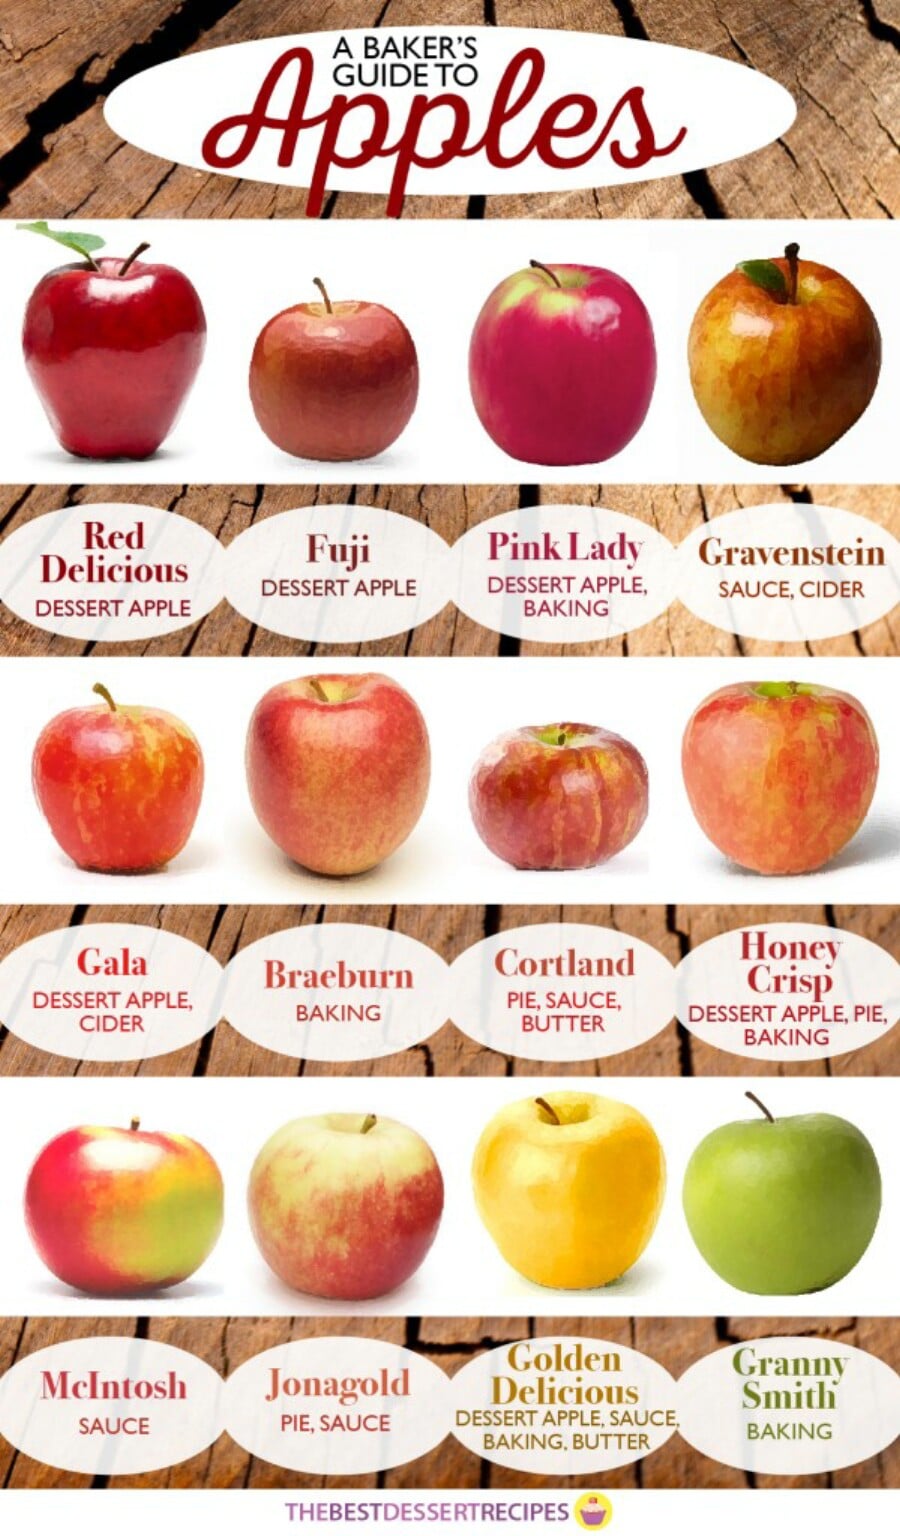 Recognize every type of apple on sight.